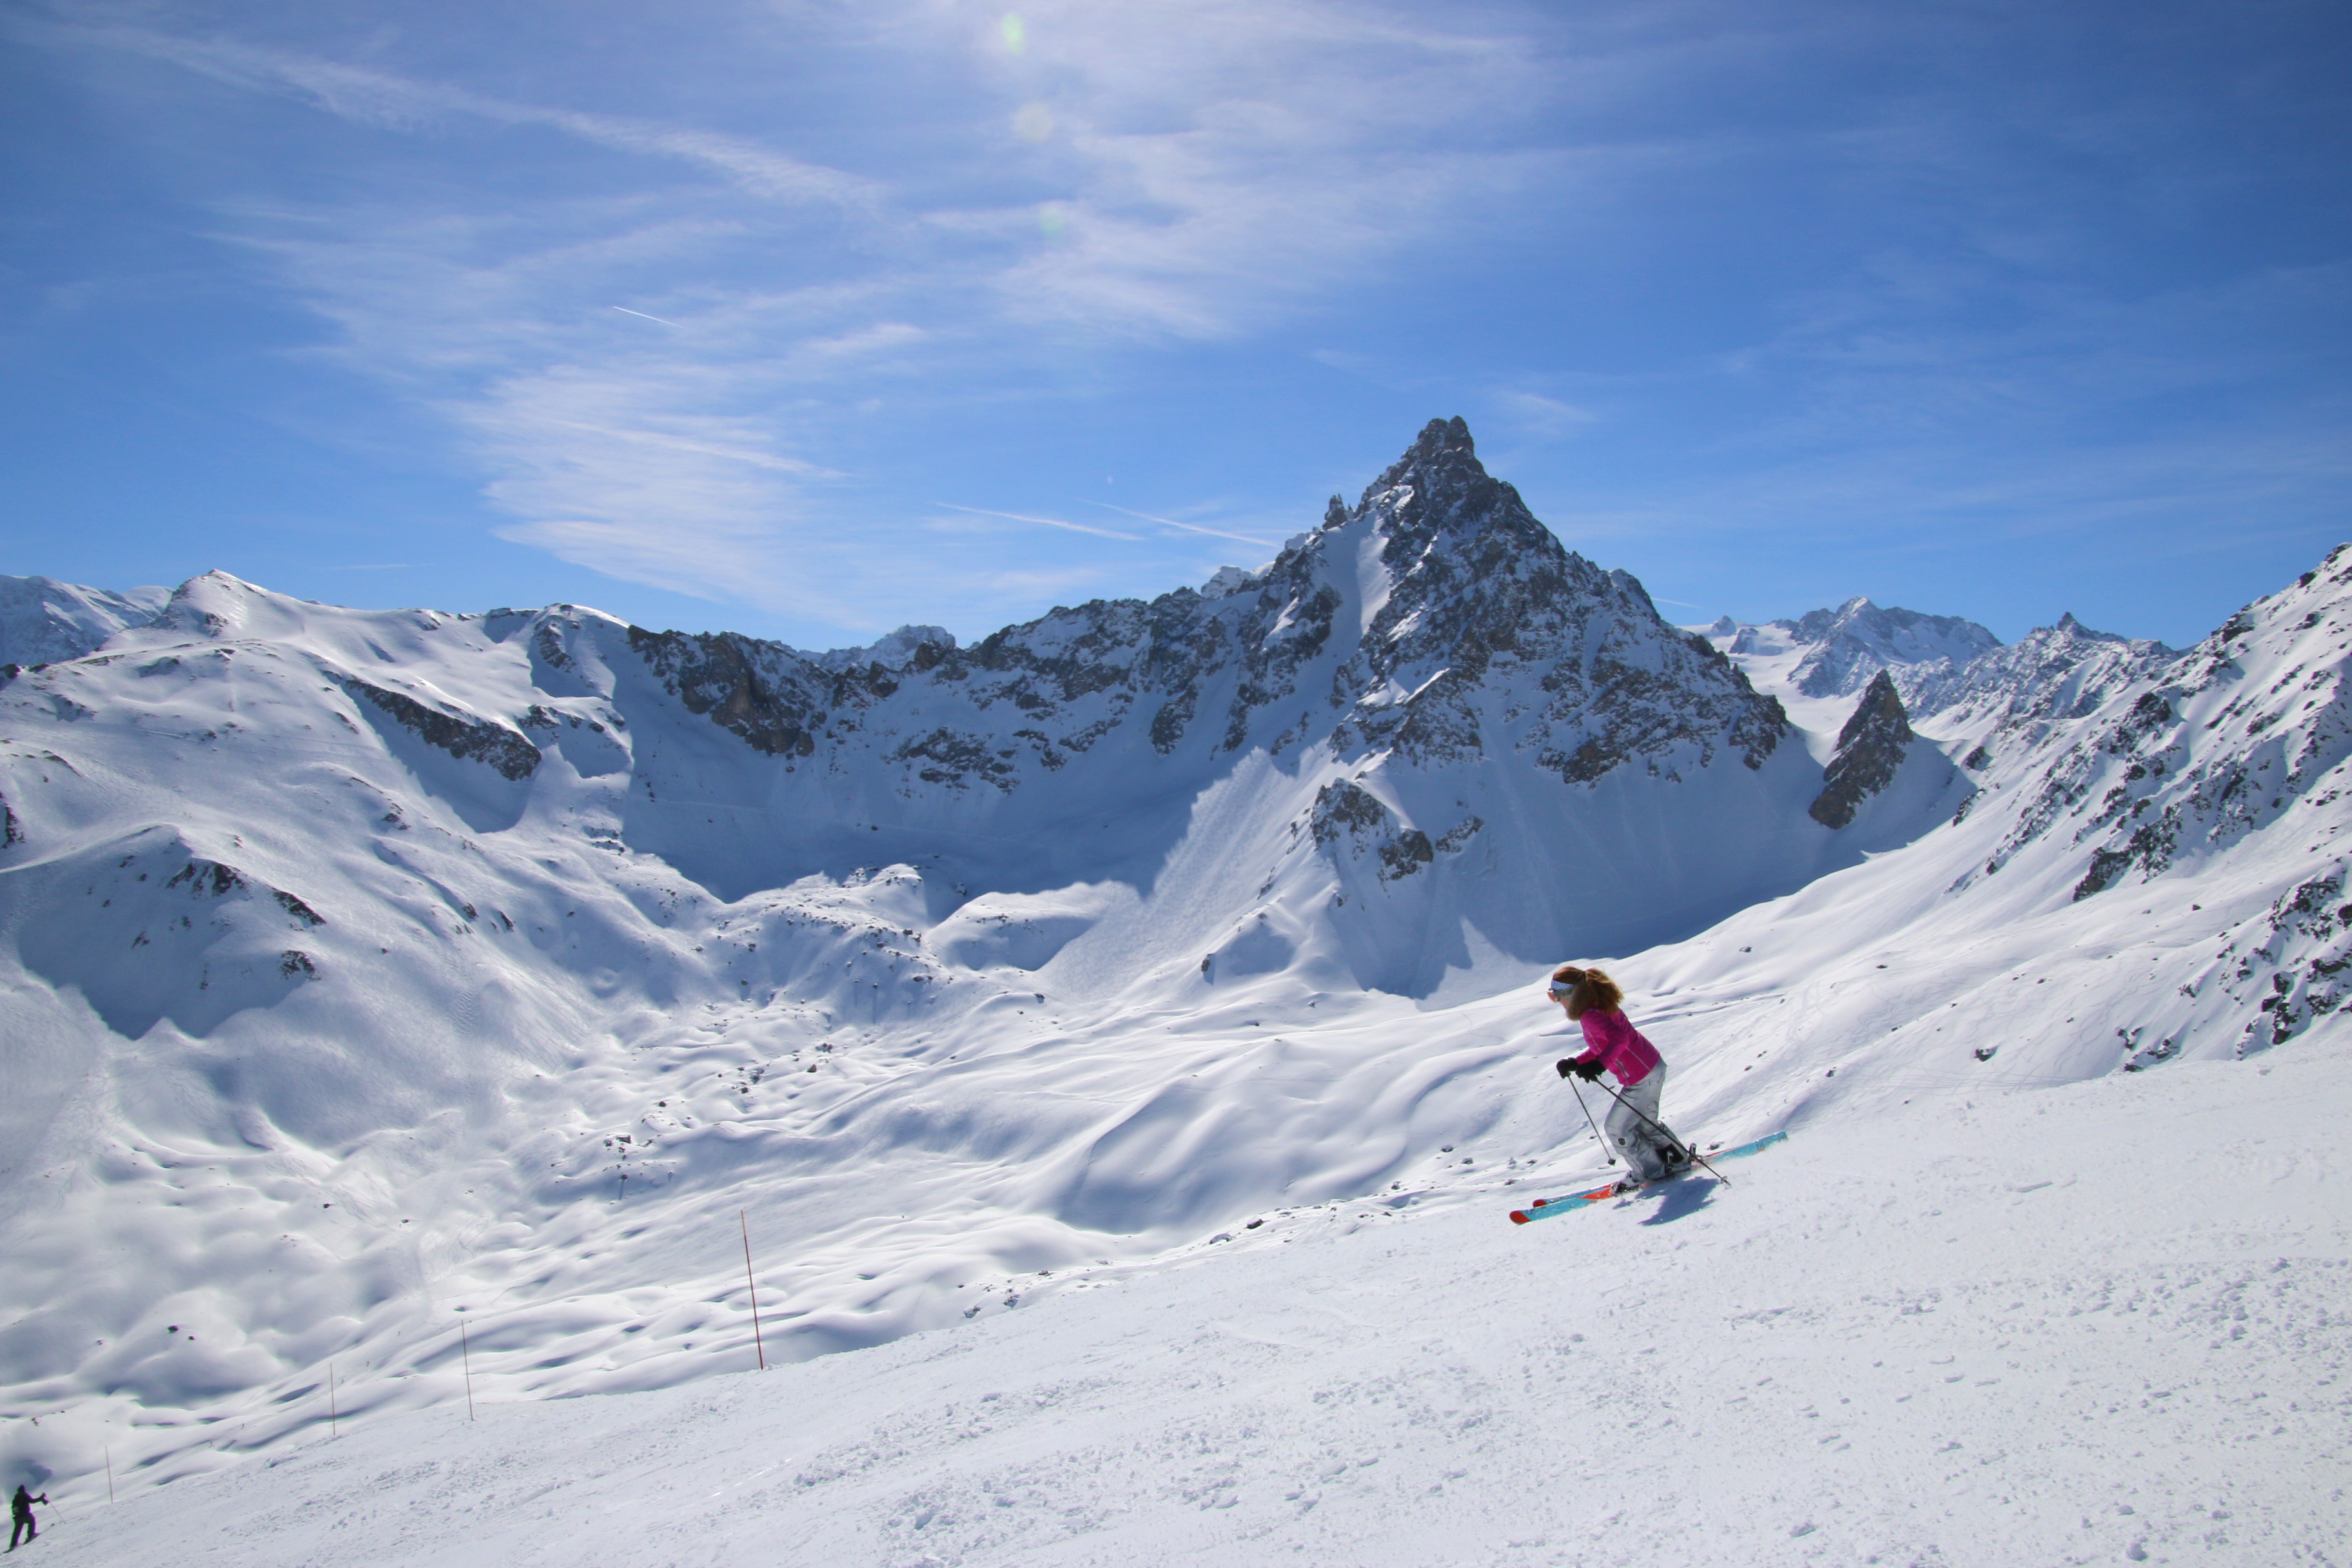 5 Best Ski Resorts in Germany - Where to Go Skiing in Germany This